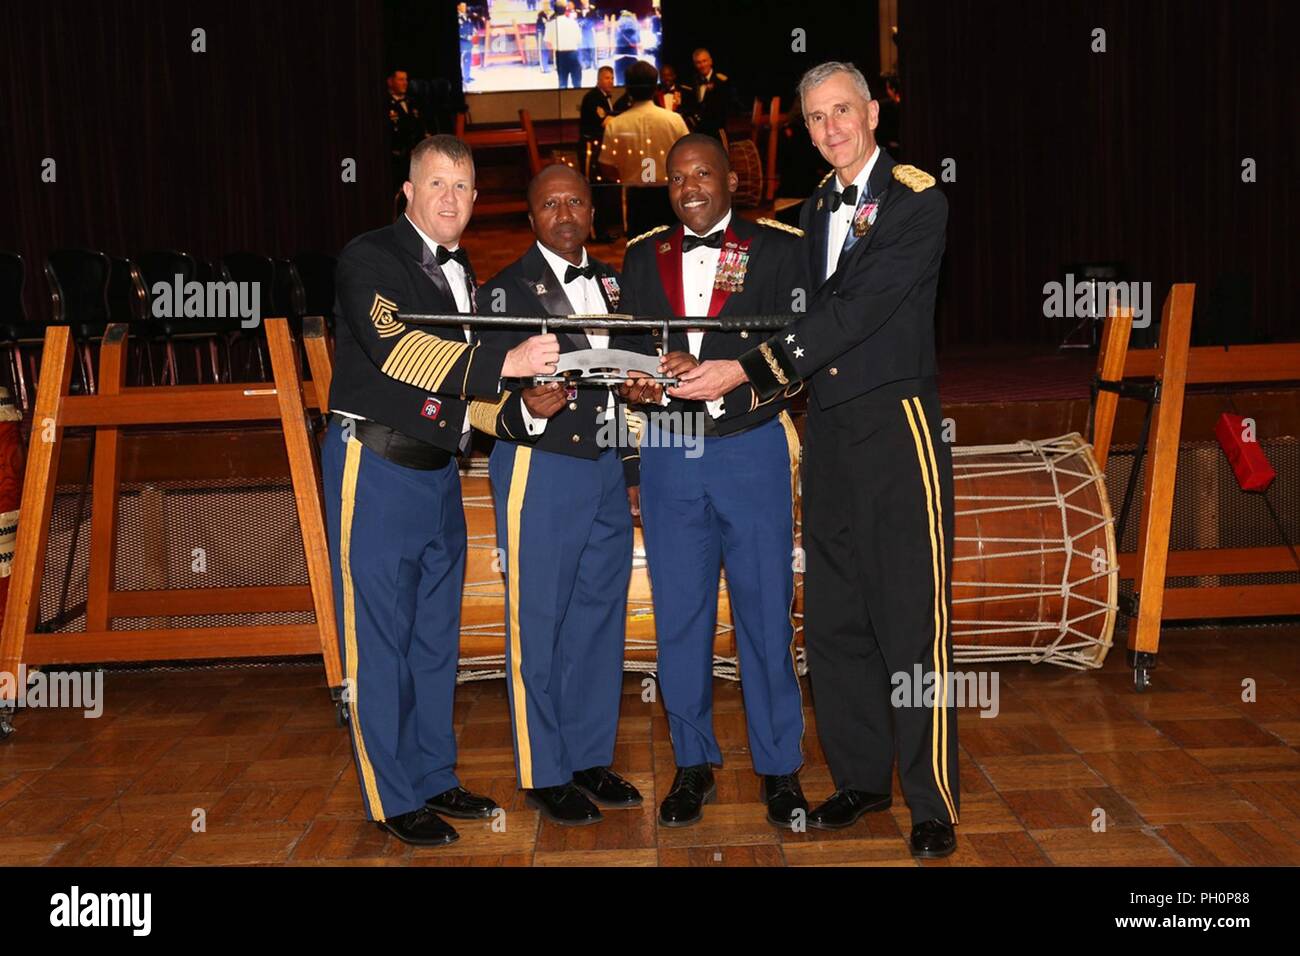 The 35th Combat Sustainment Support Battalion receives first place in the Commander’s Cup Competition for having the most wins as a unit during the Army Birthday Ball held June 14, 2018 at Camp Zama Community Club. Pictured from left to right are: Command Sgt. Maj. Richard Clark, command sergeant major of U.S. Army Japan, Command Sgt. Maj.  Kenneth Law, command sergeant major of 35th CSSB, and Maj. Gen. James Pasquarette, commanding general of USARJ. Stock Photo